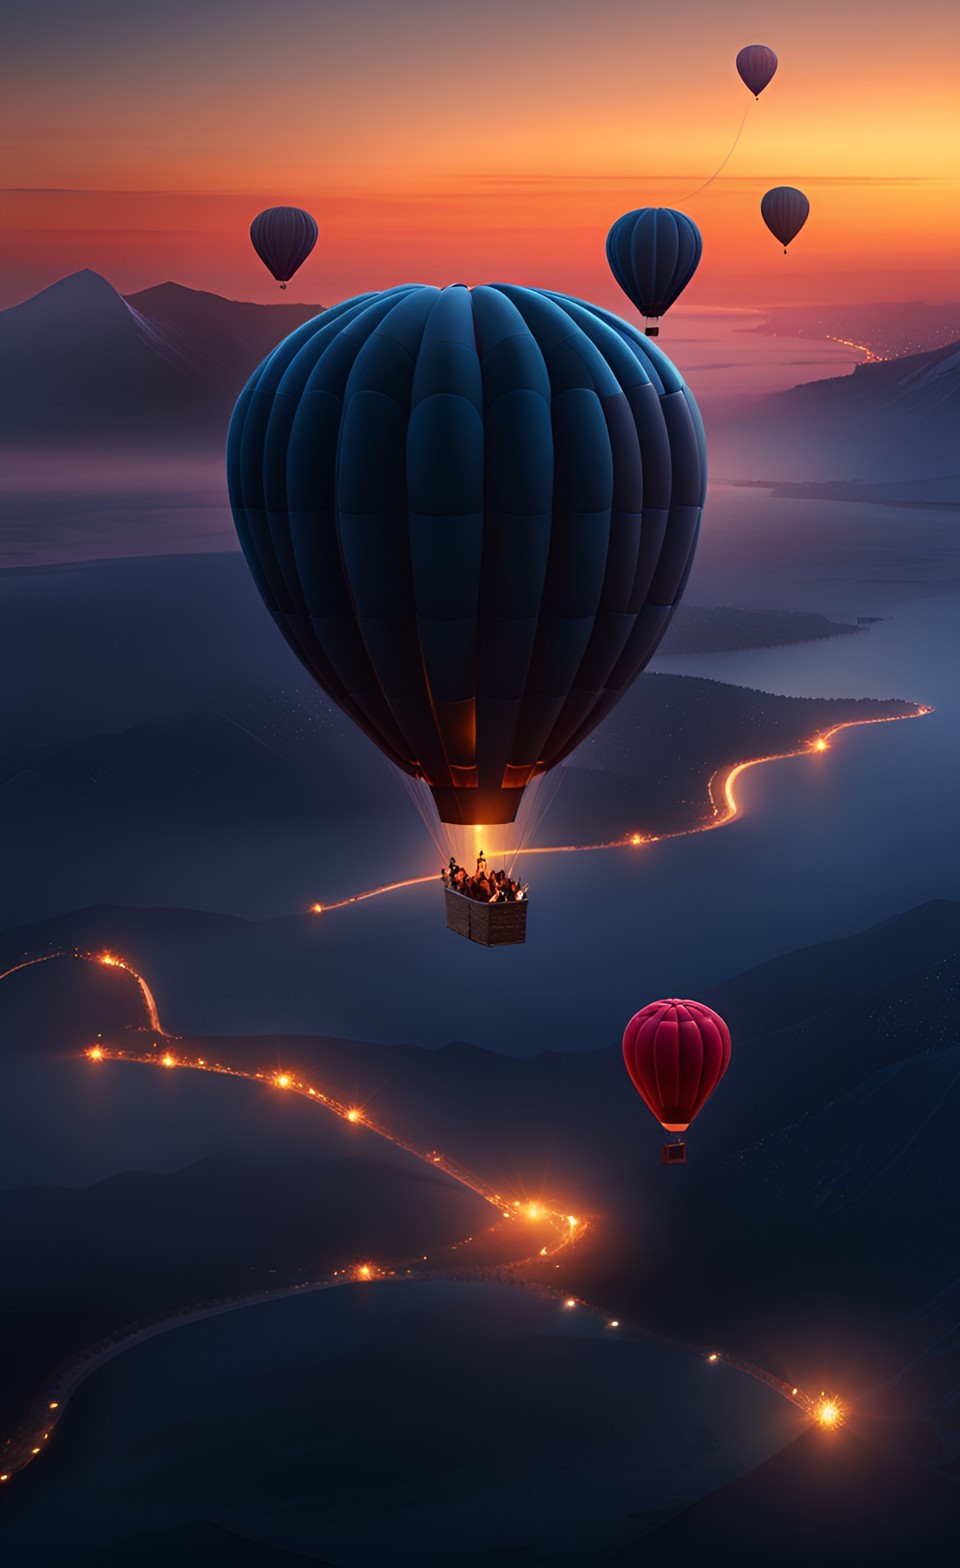 Fly with Balloons at Dusk iPhone Wallpaper 4K